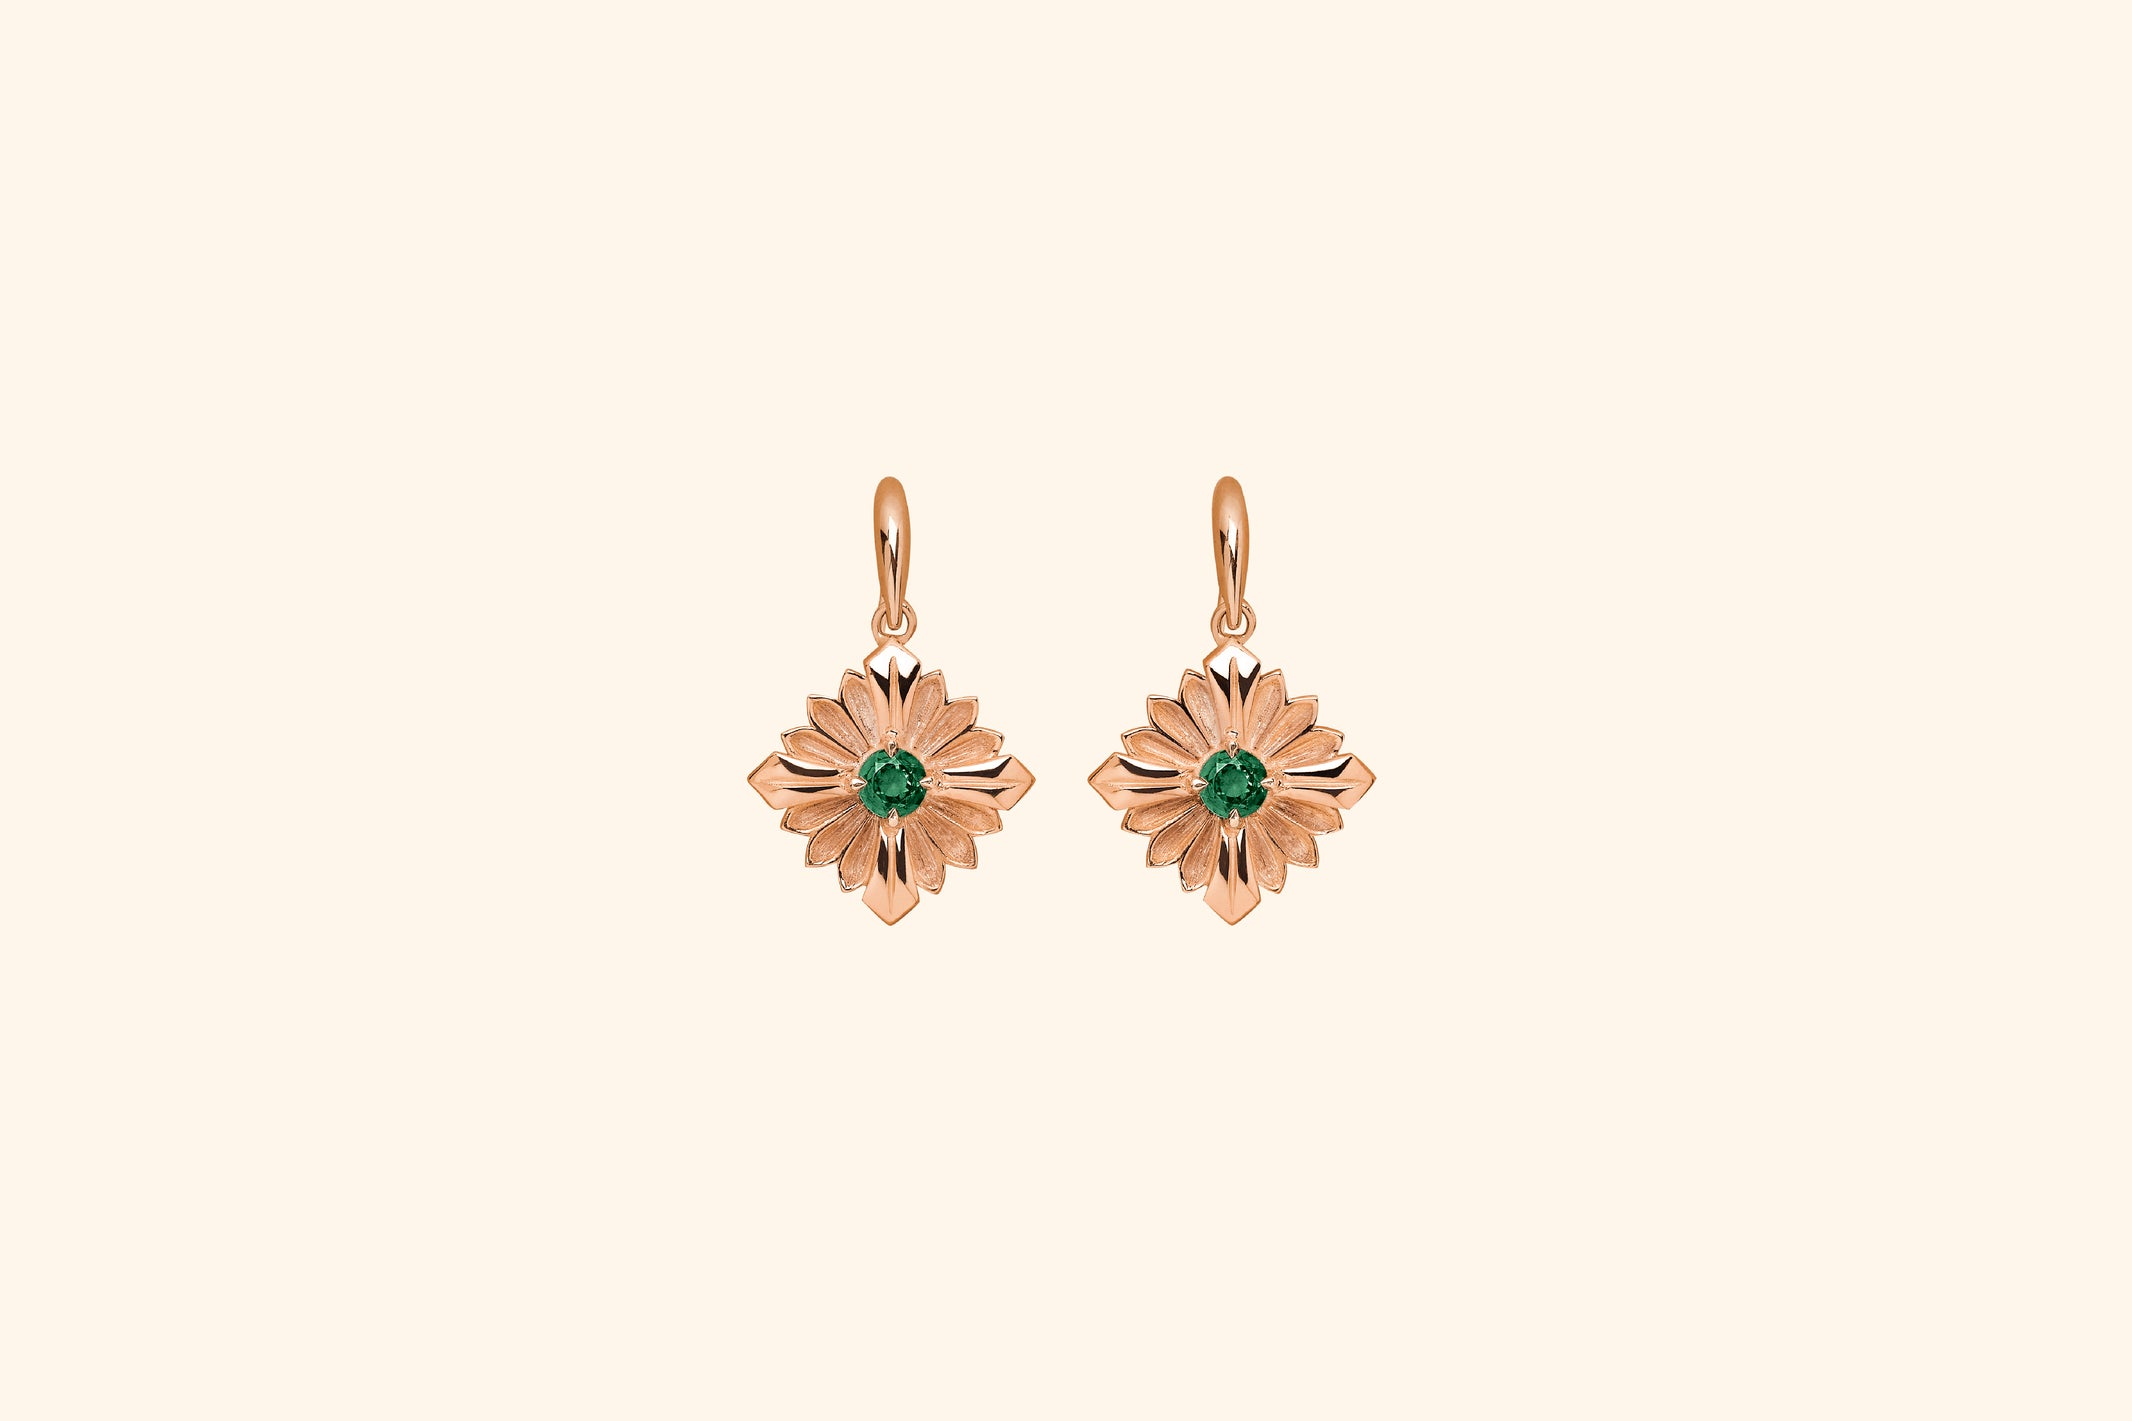 Stamp earrings, rose gold, green tourmalines